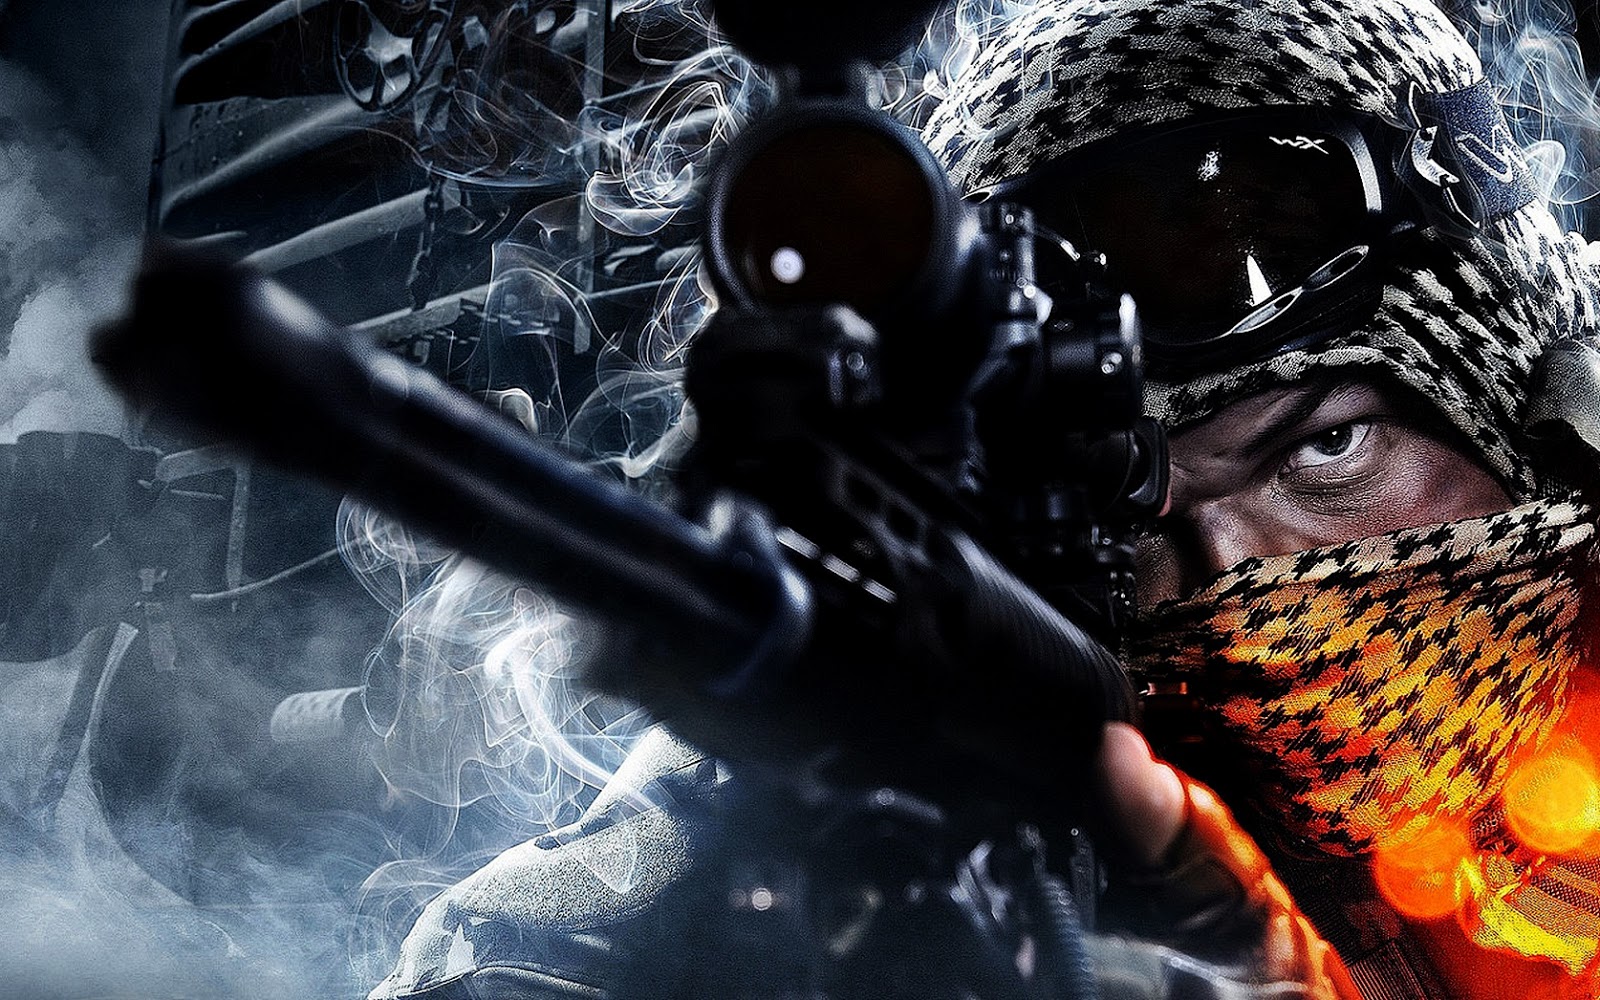 Best Sniper Wallpaper From Video Games In HD